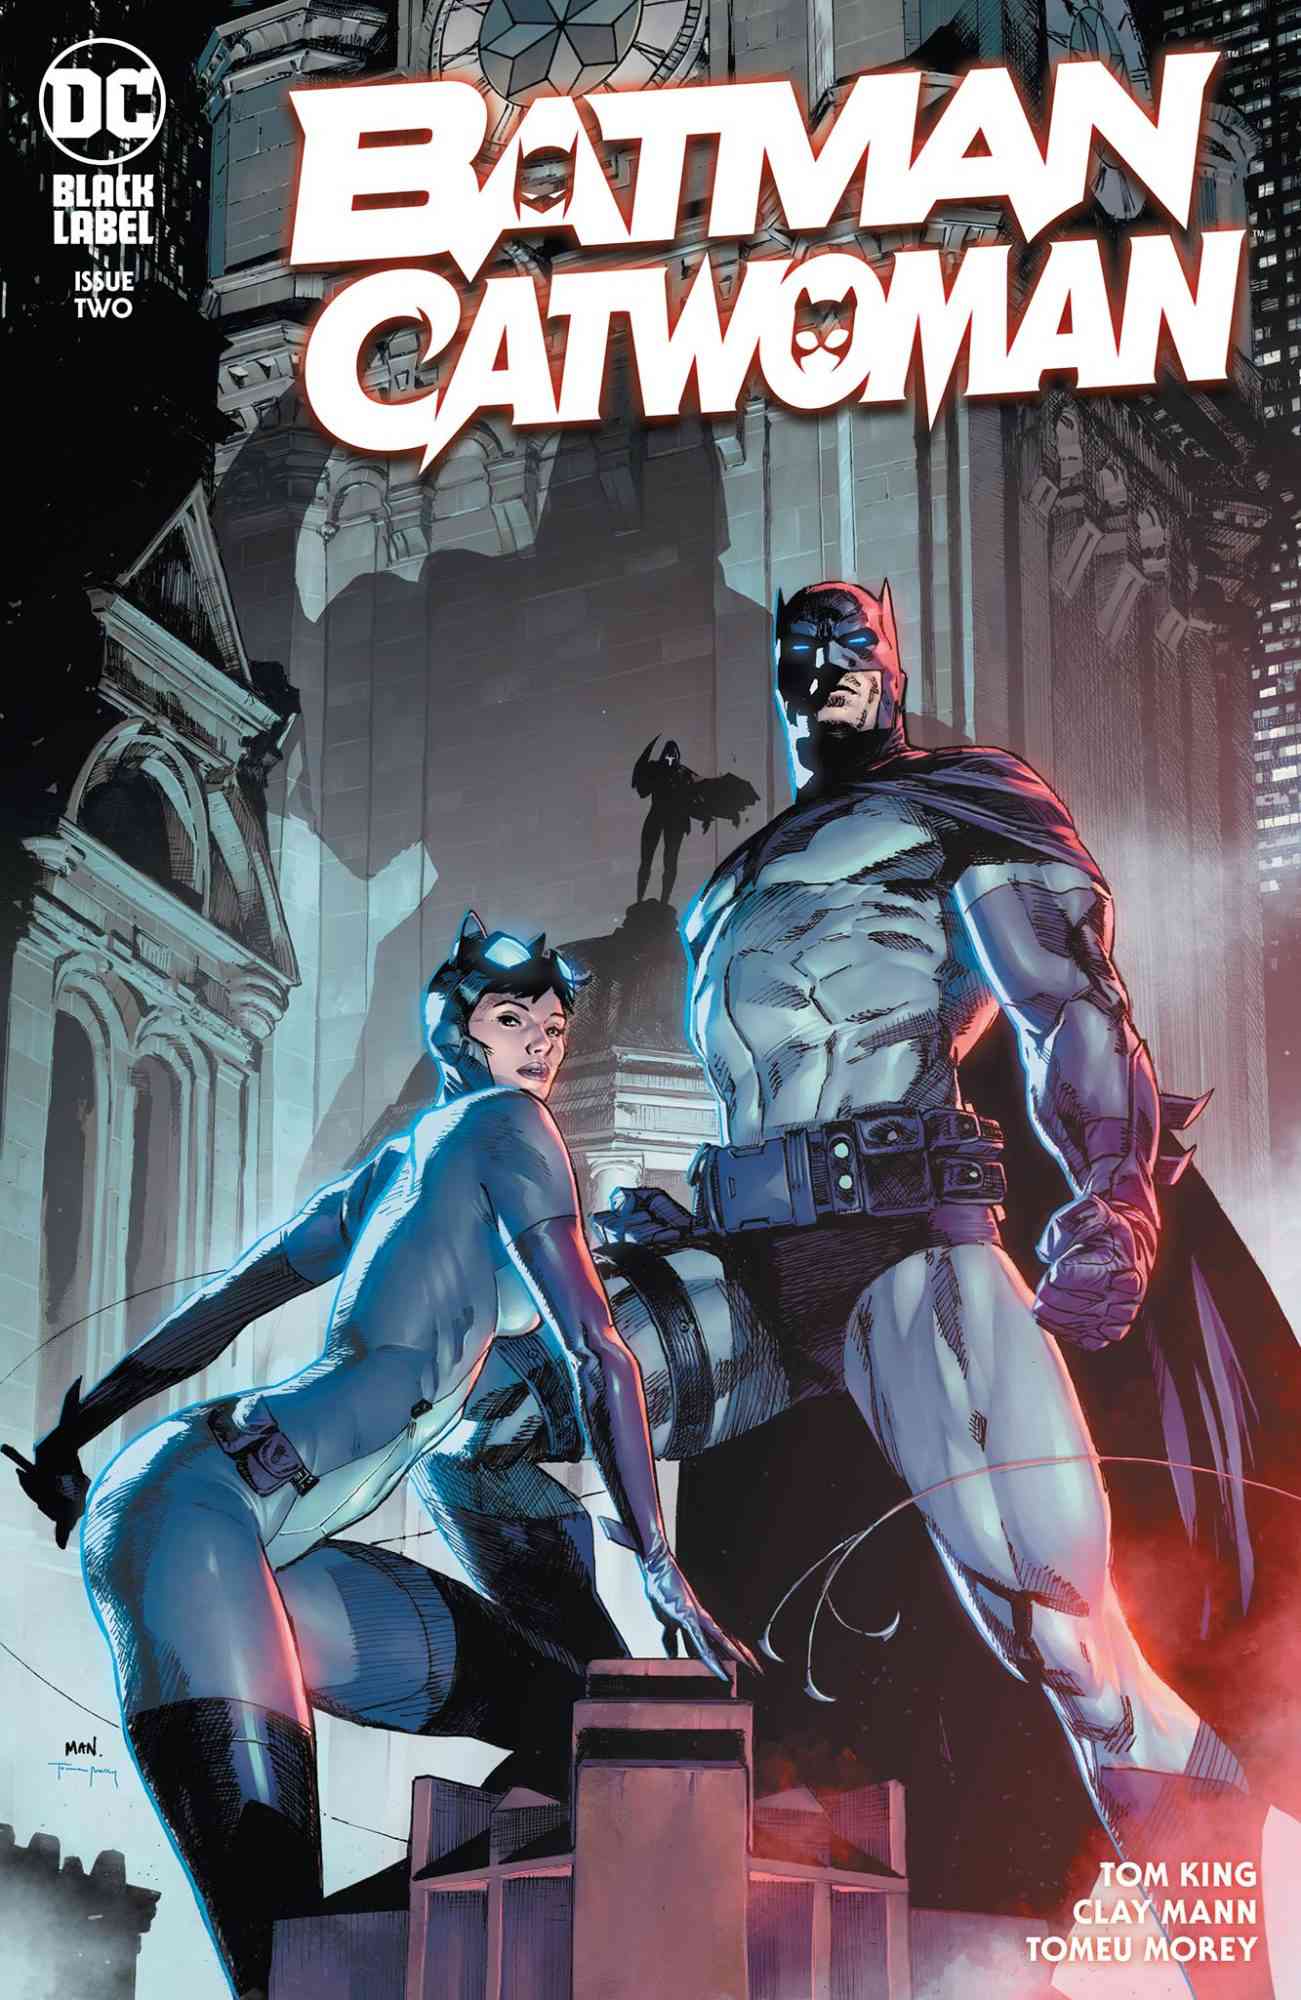 Batman Catwoman Issue Two